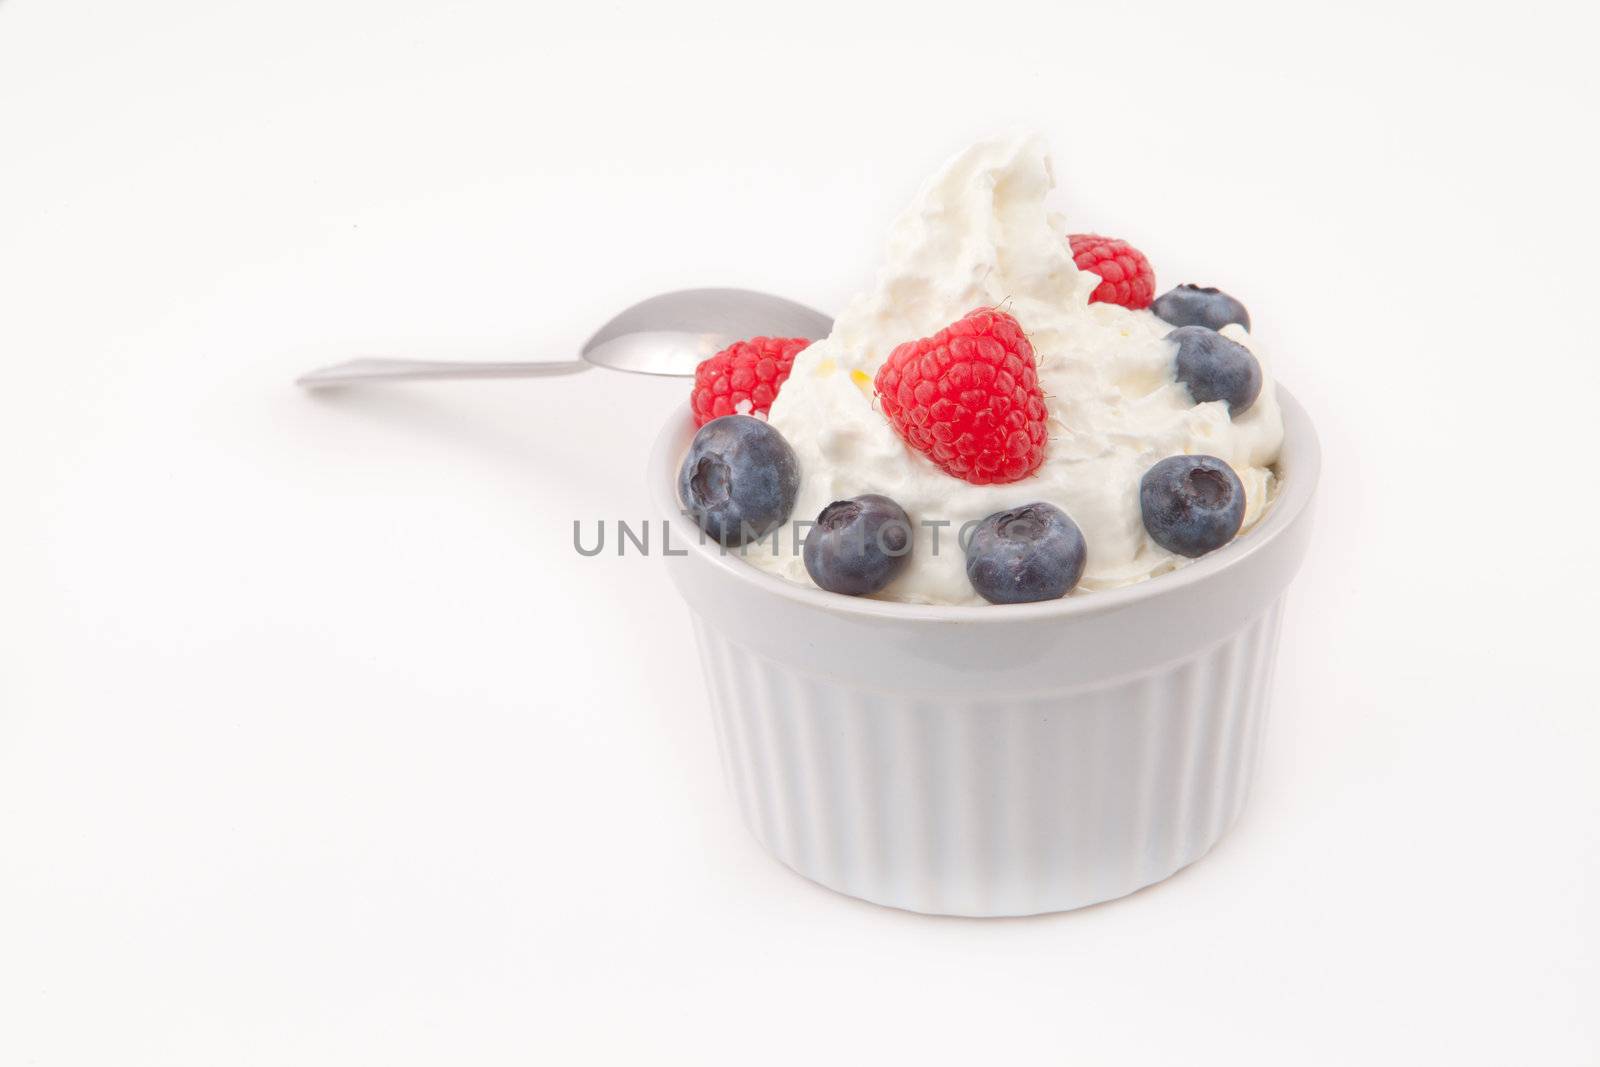 Jar of berries and whipped cream  with spoon  against white background